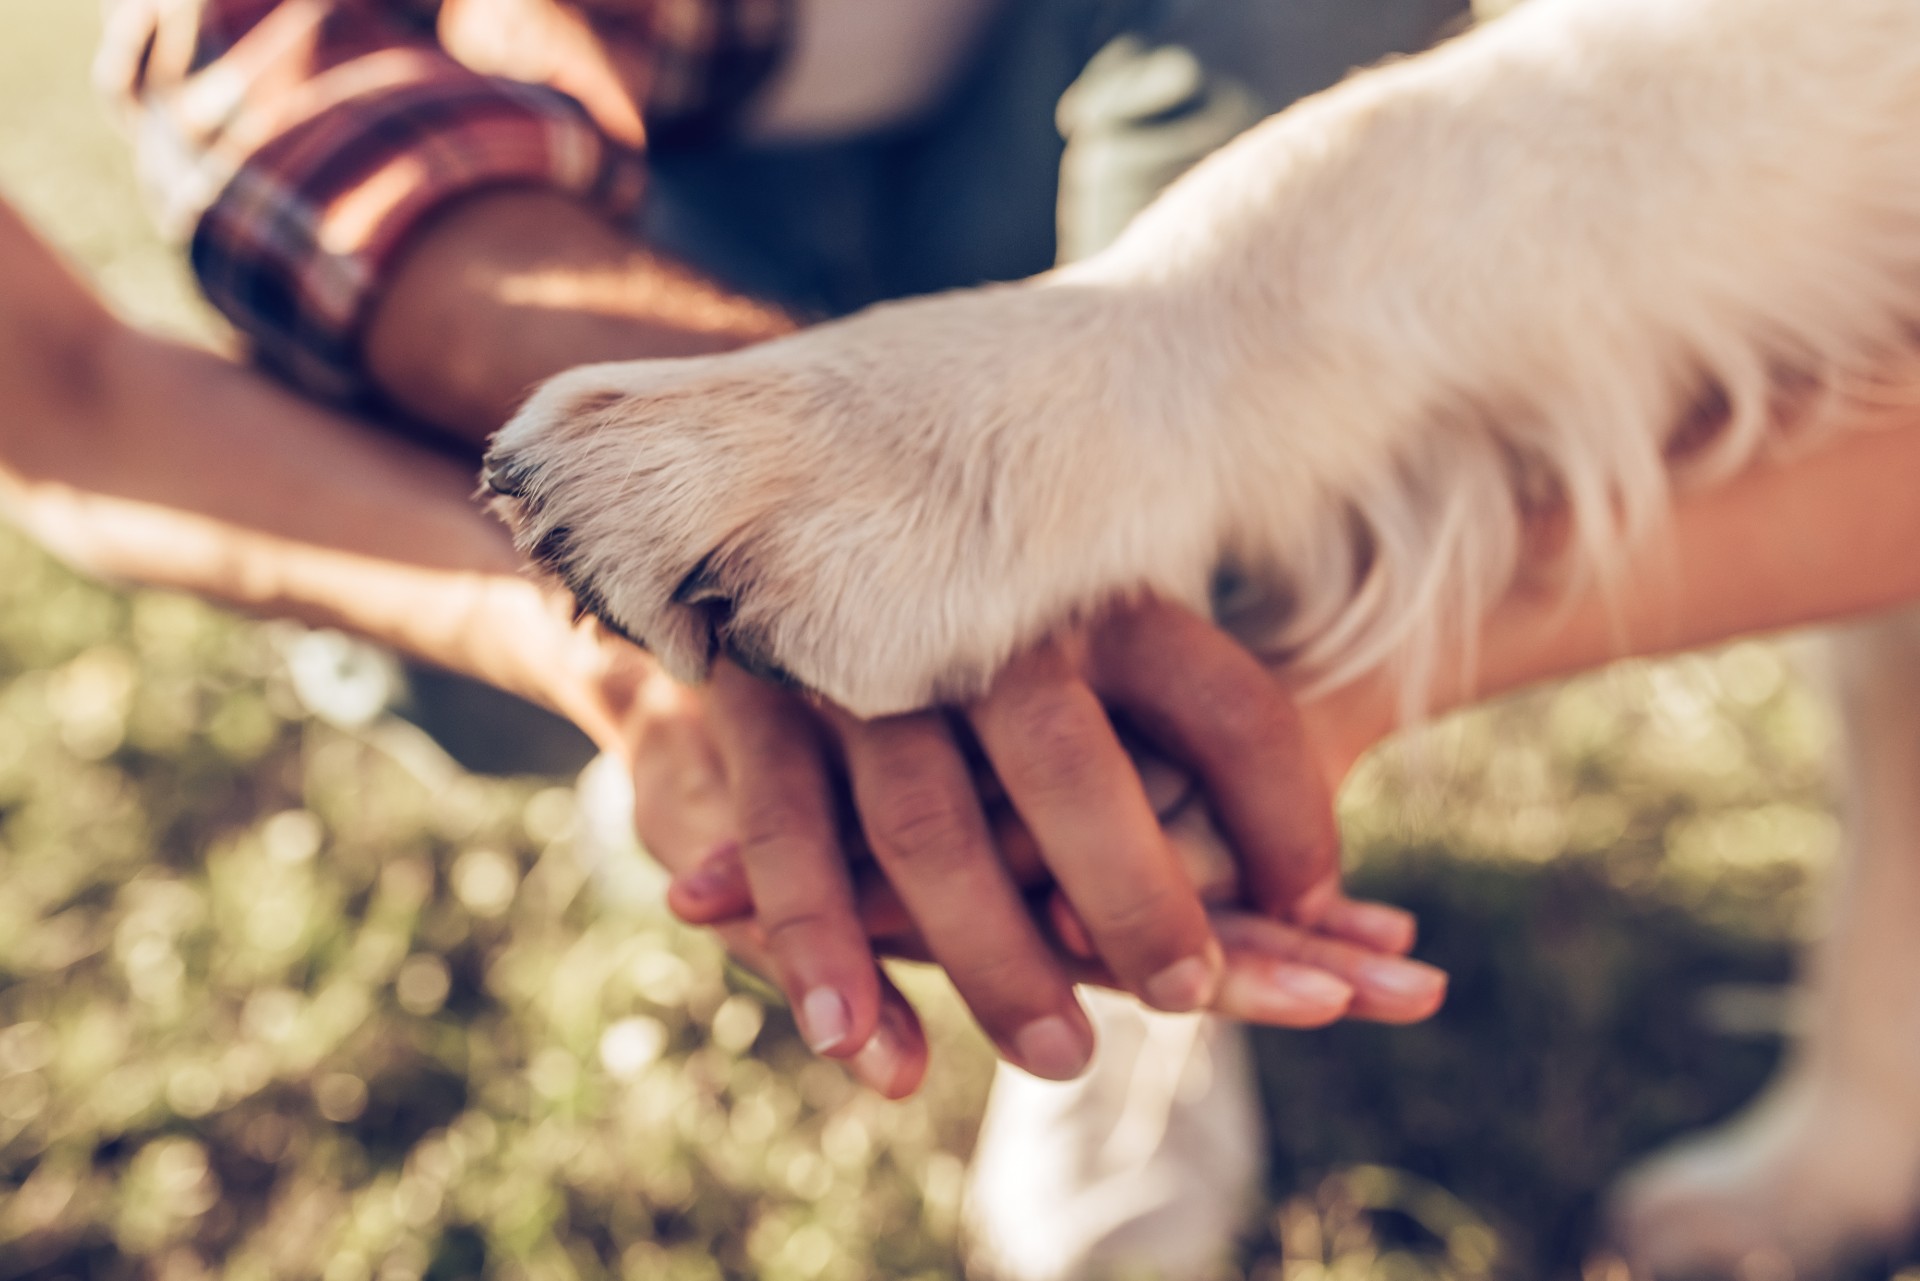 A picture of hands and a dog paw